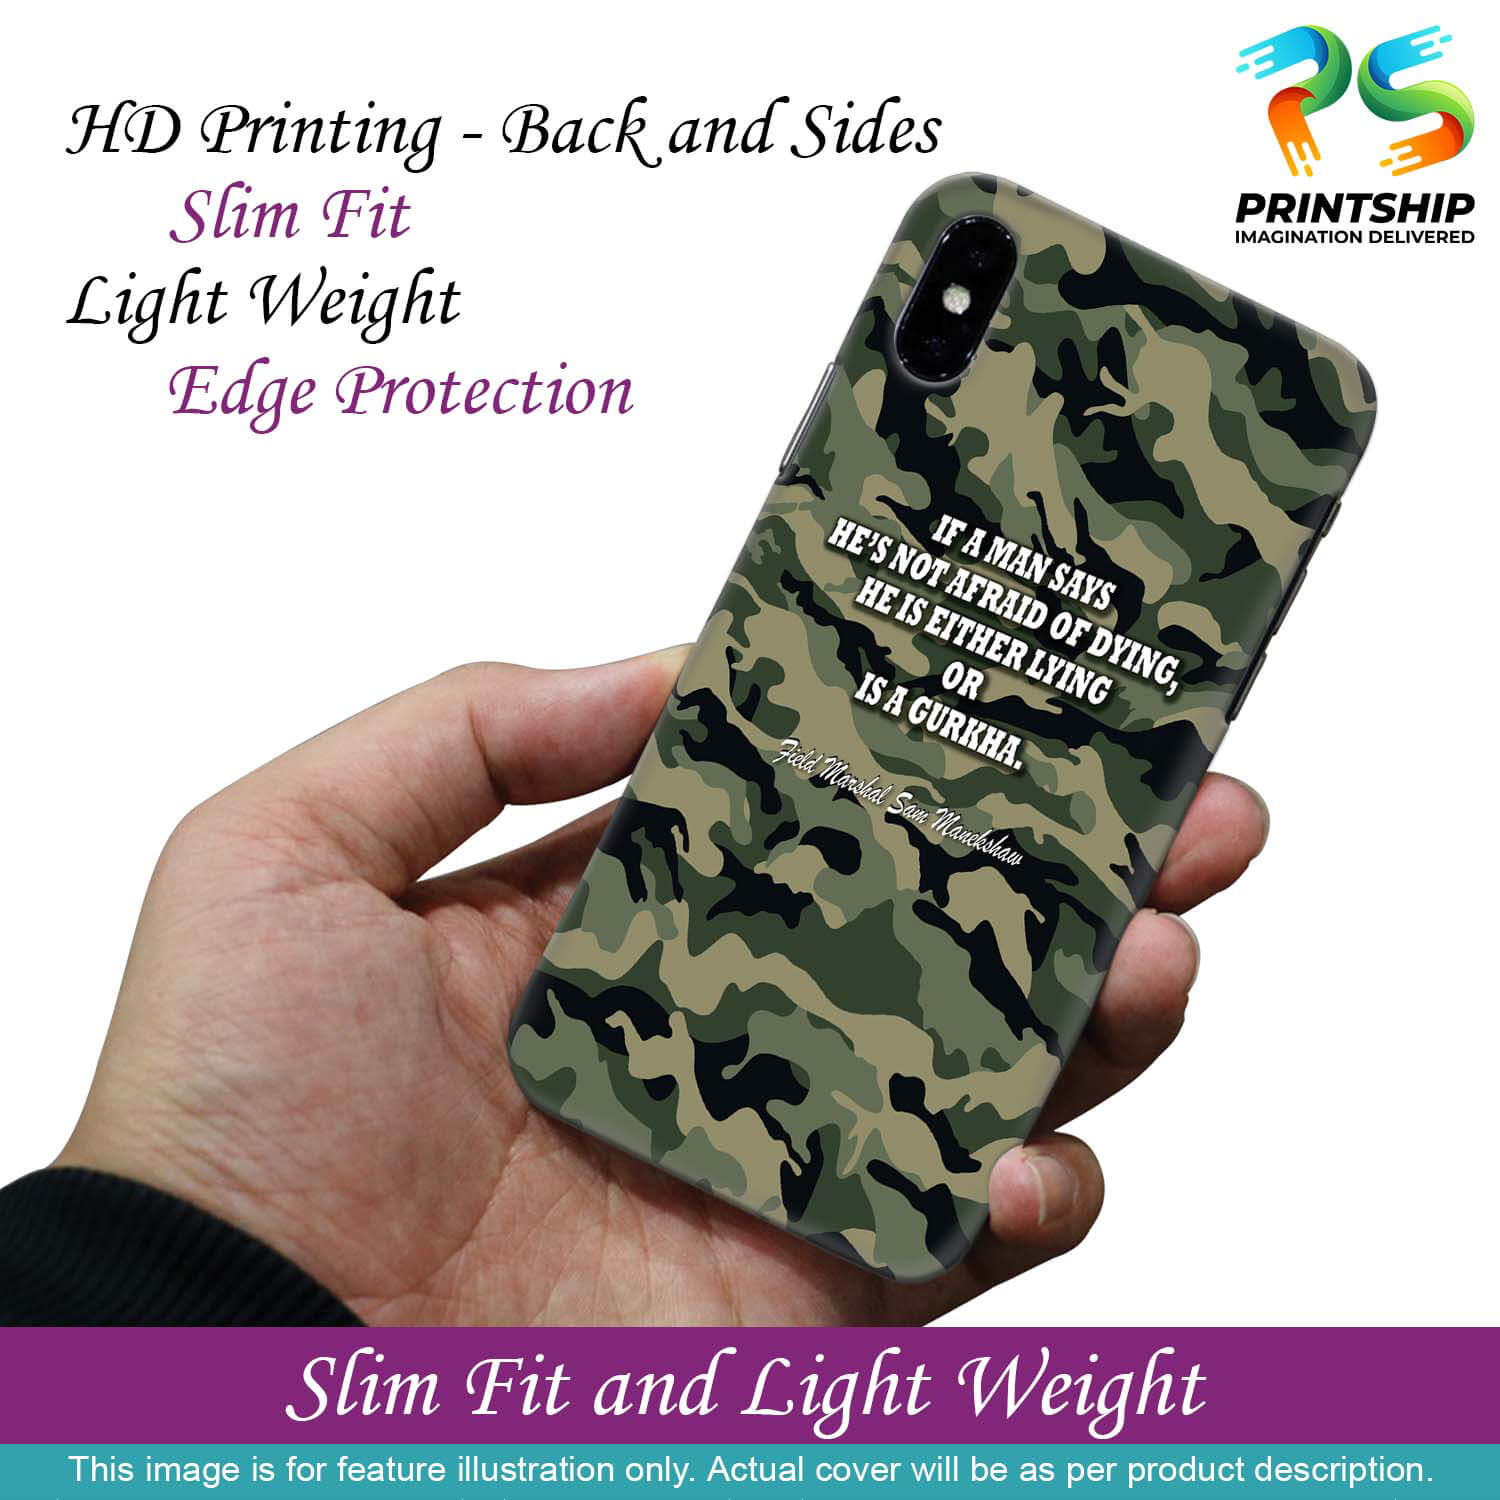 W0450-Indian Army Quote Back Cover for Huawei P30 lite